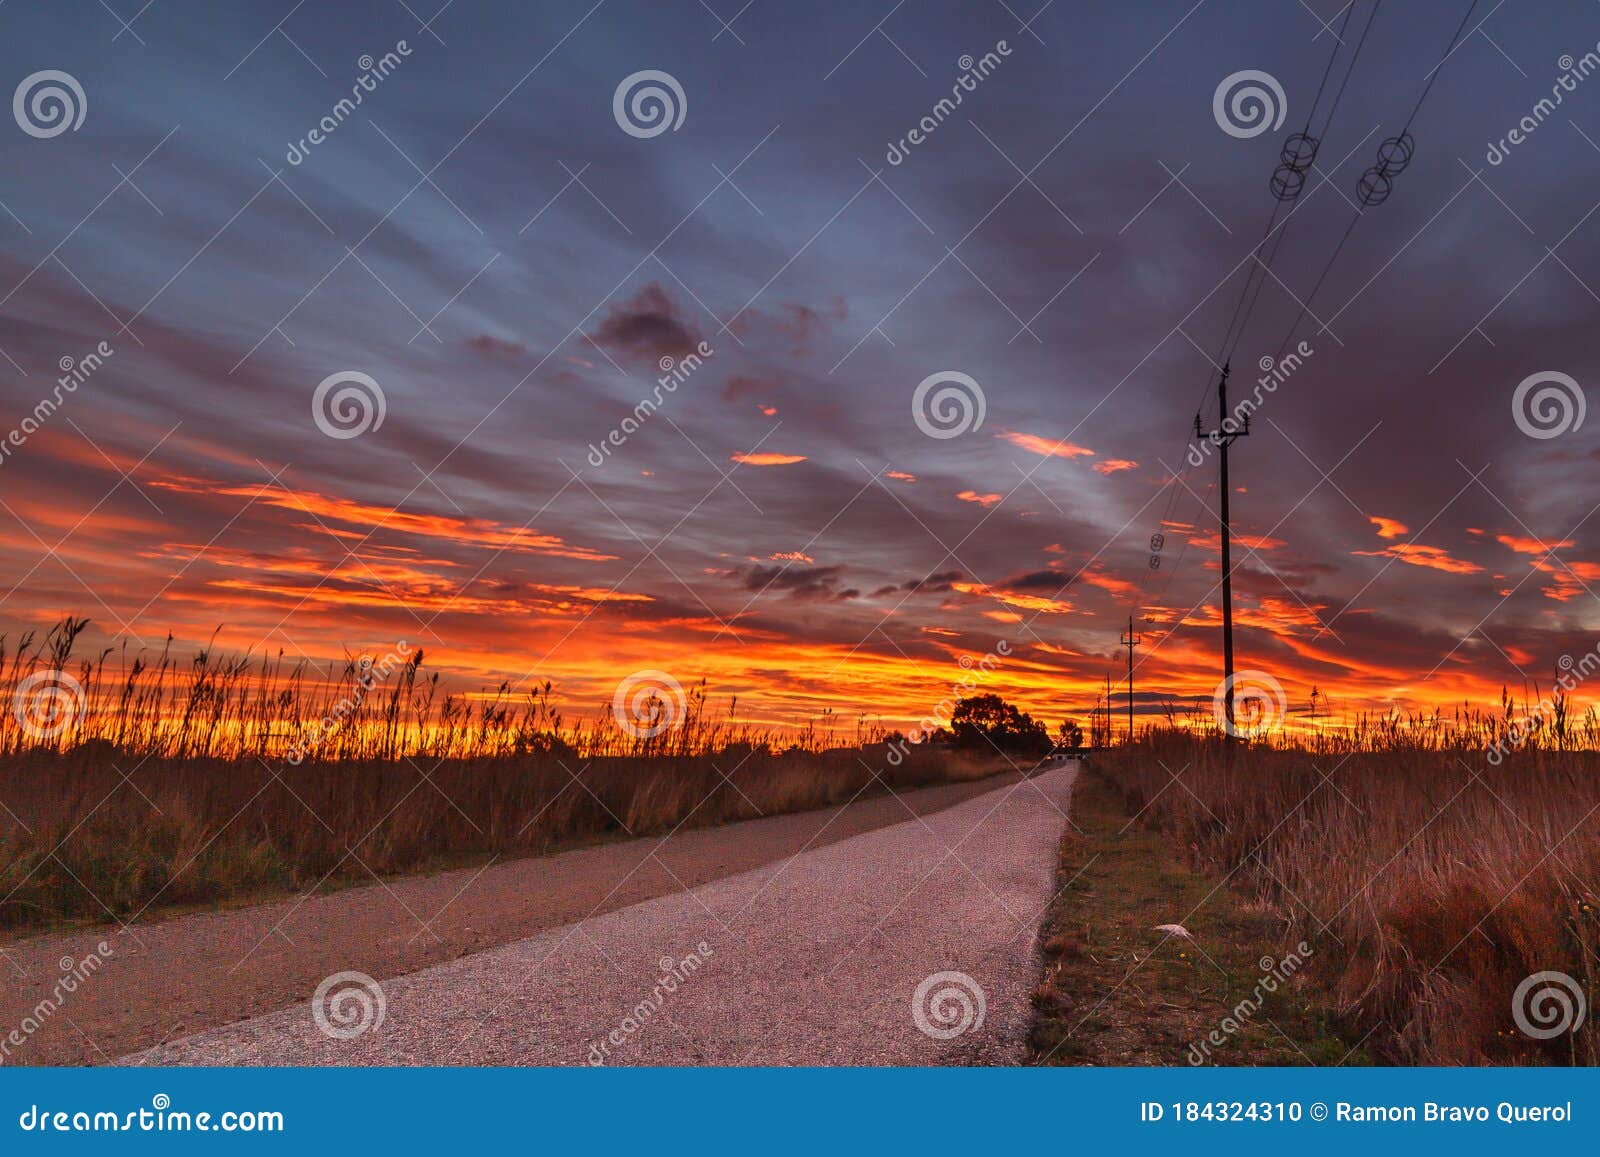 sunset landscape with electric lying nuves yellow fire road